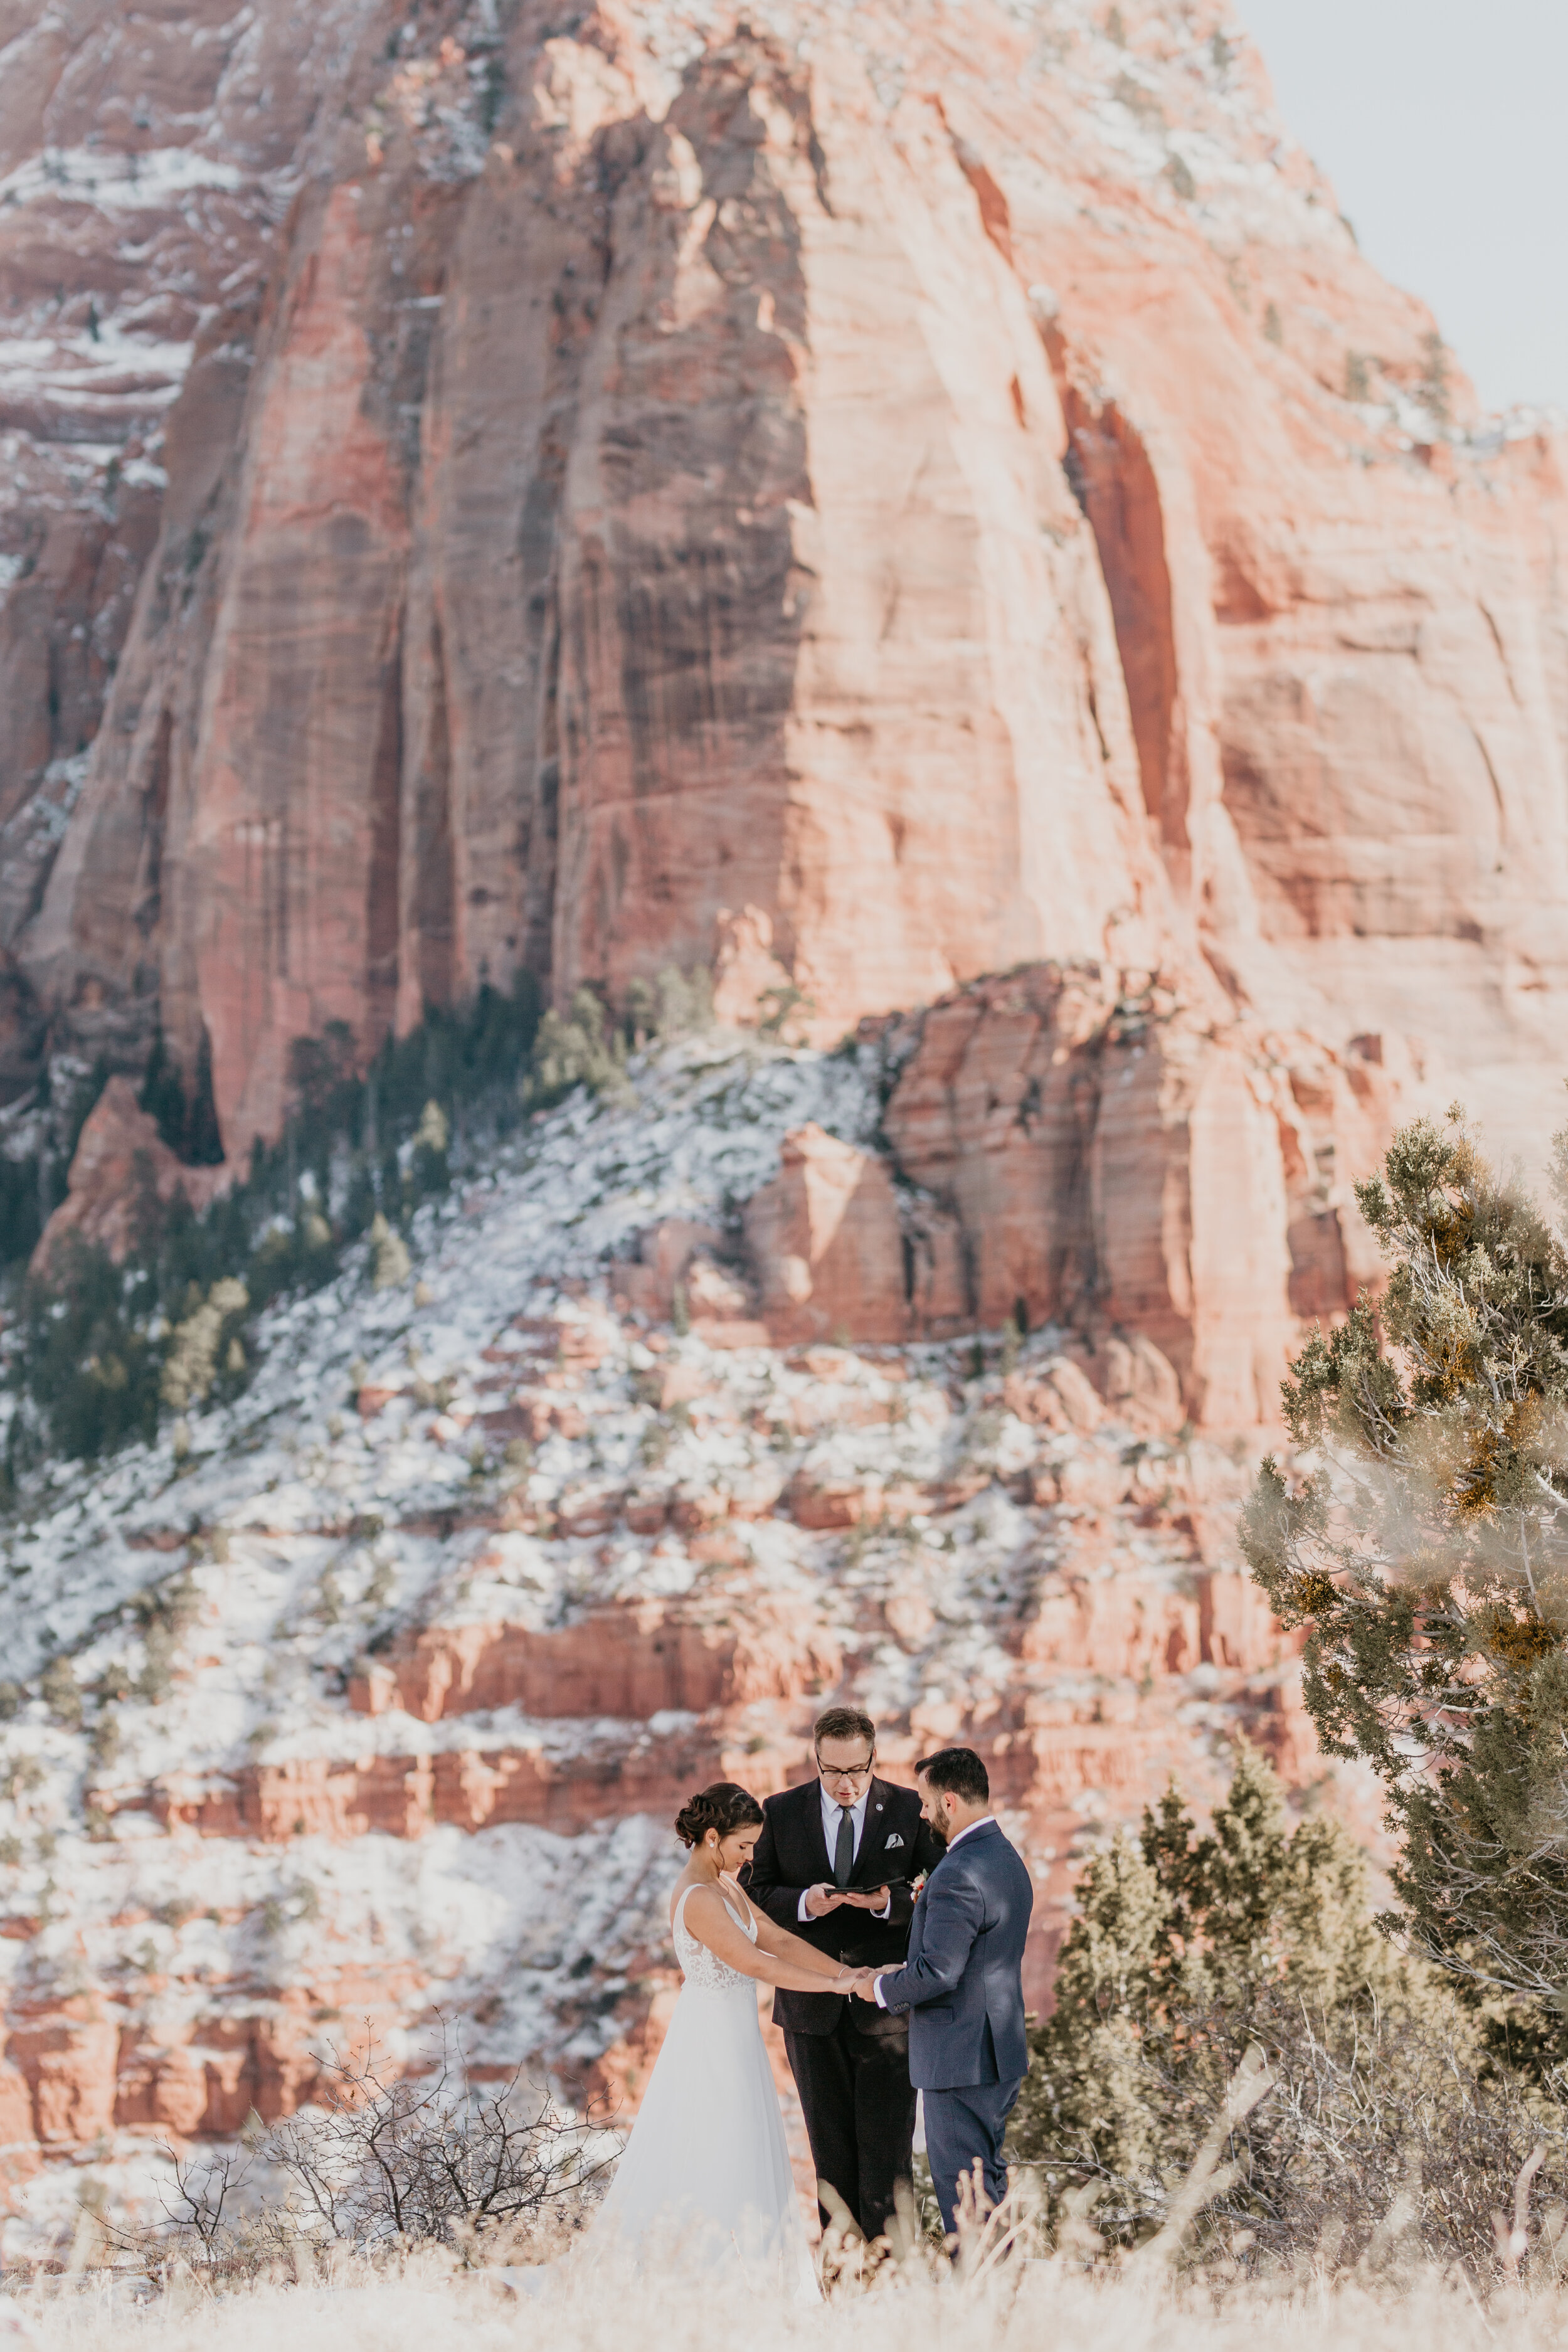 Nicole-Daacke-Photography-snowy-hiking-elopement-in-zion-national-park-zion-elopement-photographer-canyon-overlook-trial-brial-portraits-in-mt-zion-national-park-utah-desert-adventure-elopement-photographer-117.jpg